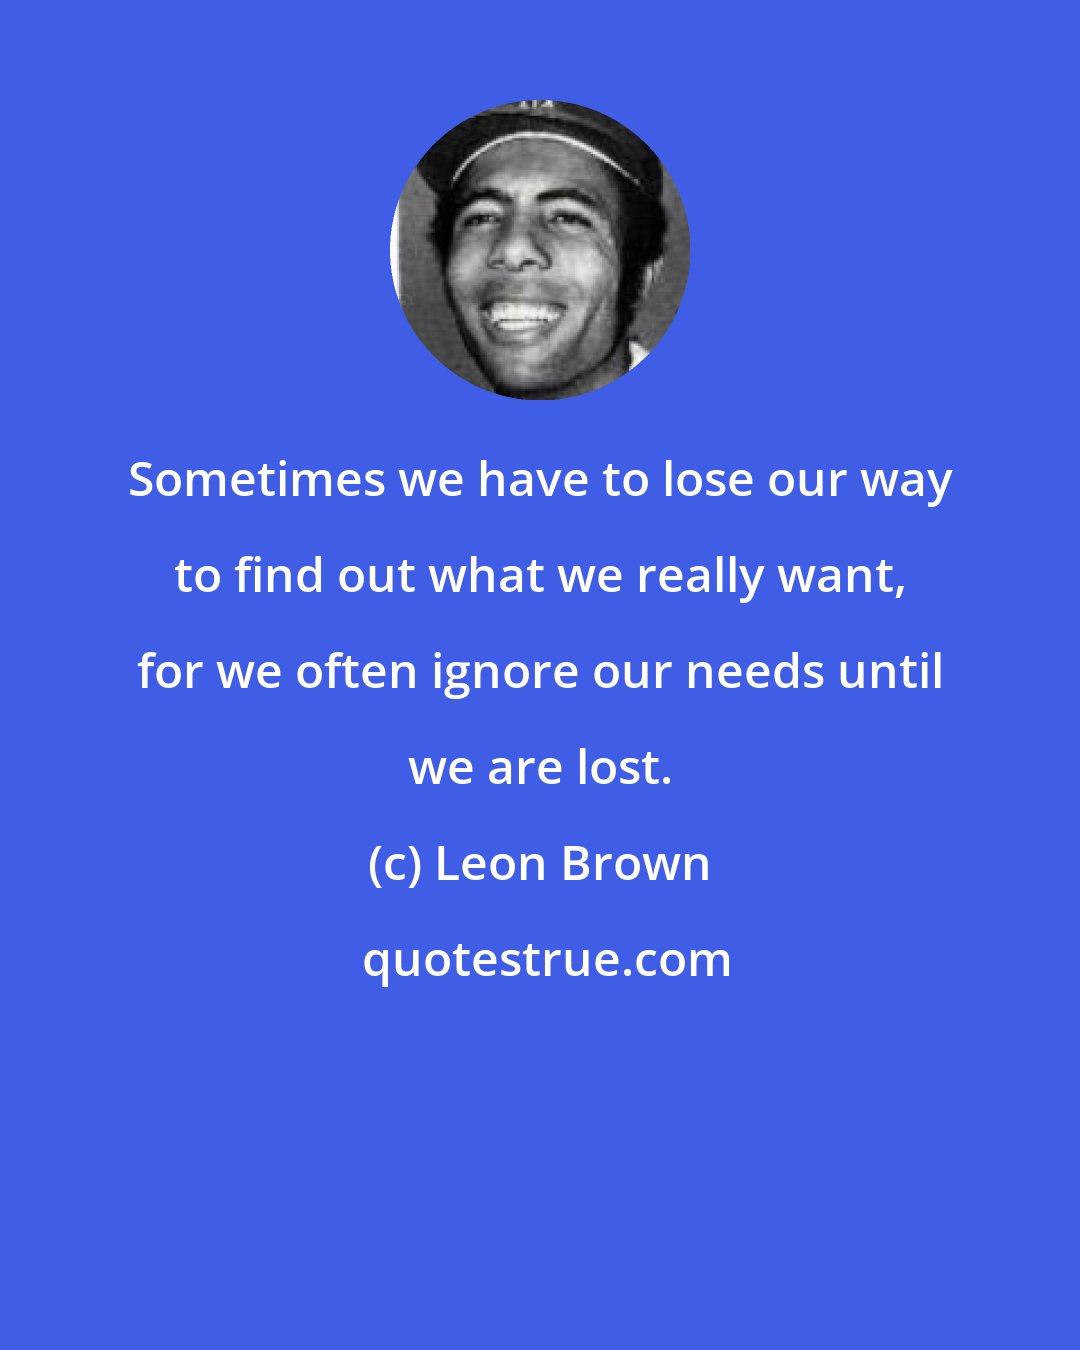 Leon Brown: Sometimes we have to lose our way to find out what we really want, for we often ignore our needs until we are lost.